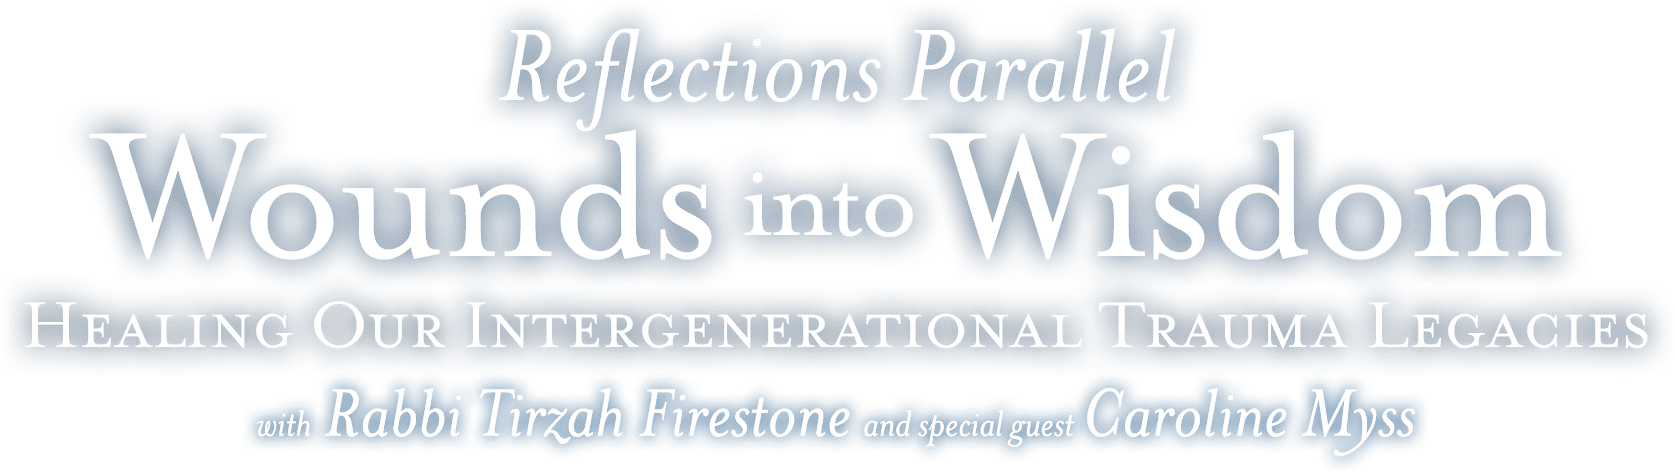 Reflections Parallel - Wounds into Wisdom: Healing Our Intergenerational Trauma Legacies.